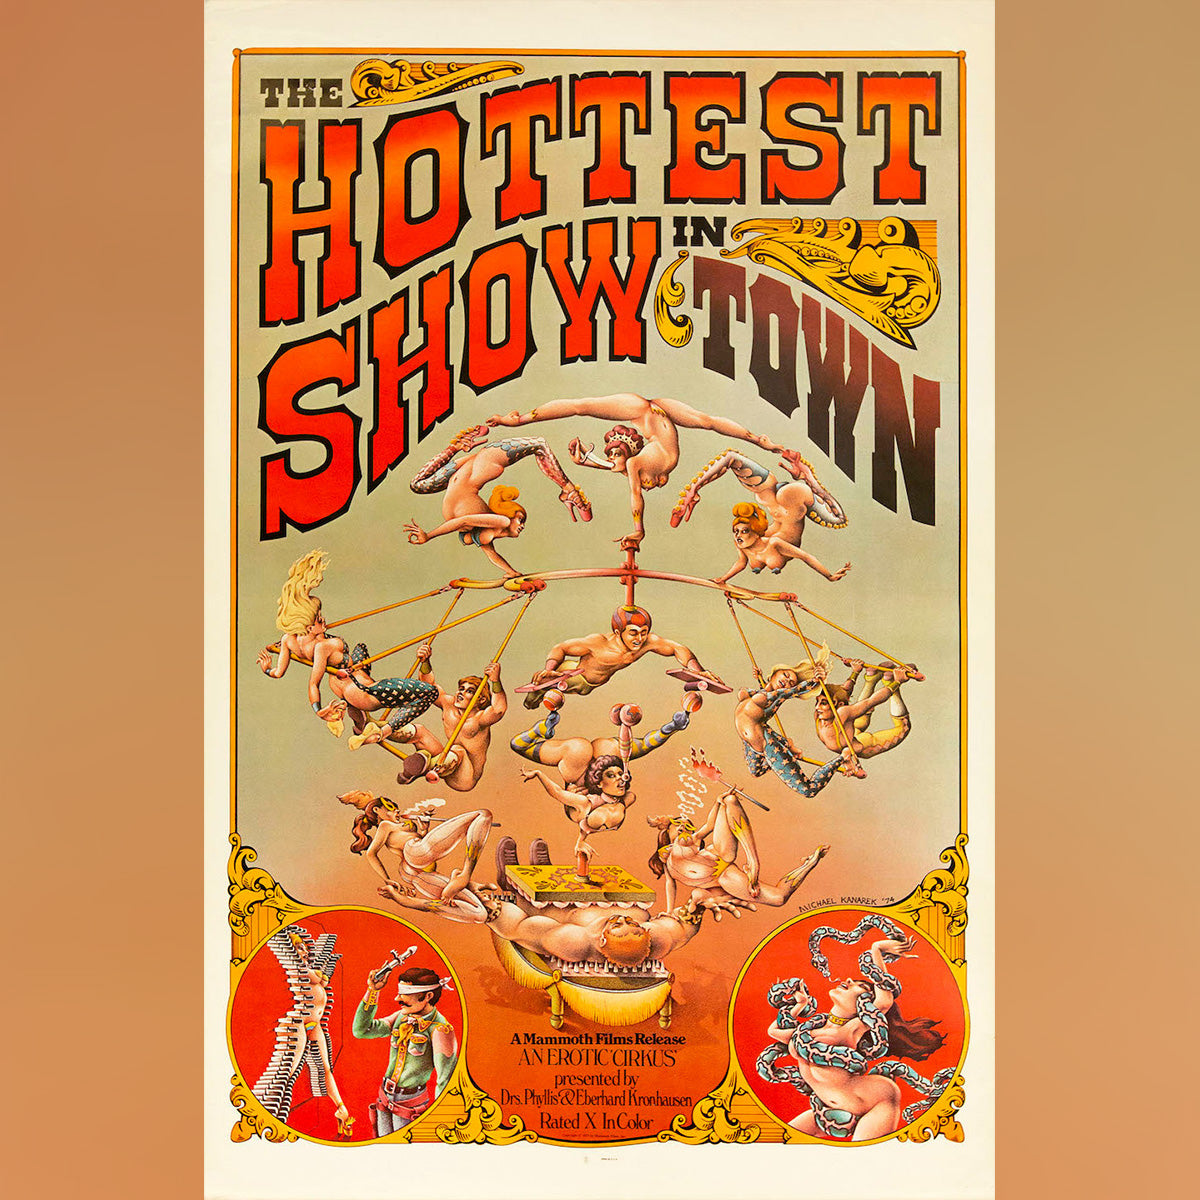 Original Movie Poster of Hottest Show In Town, The (1974)